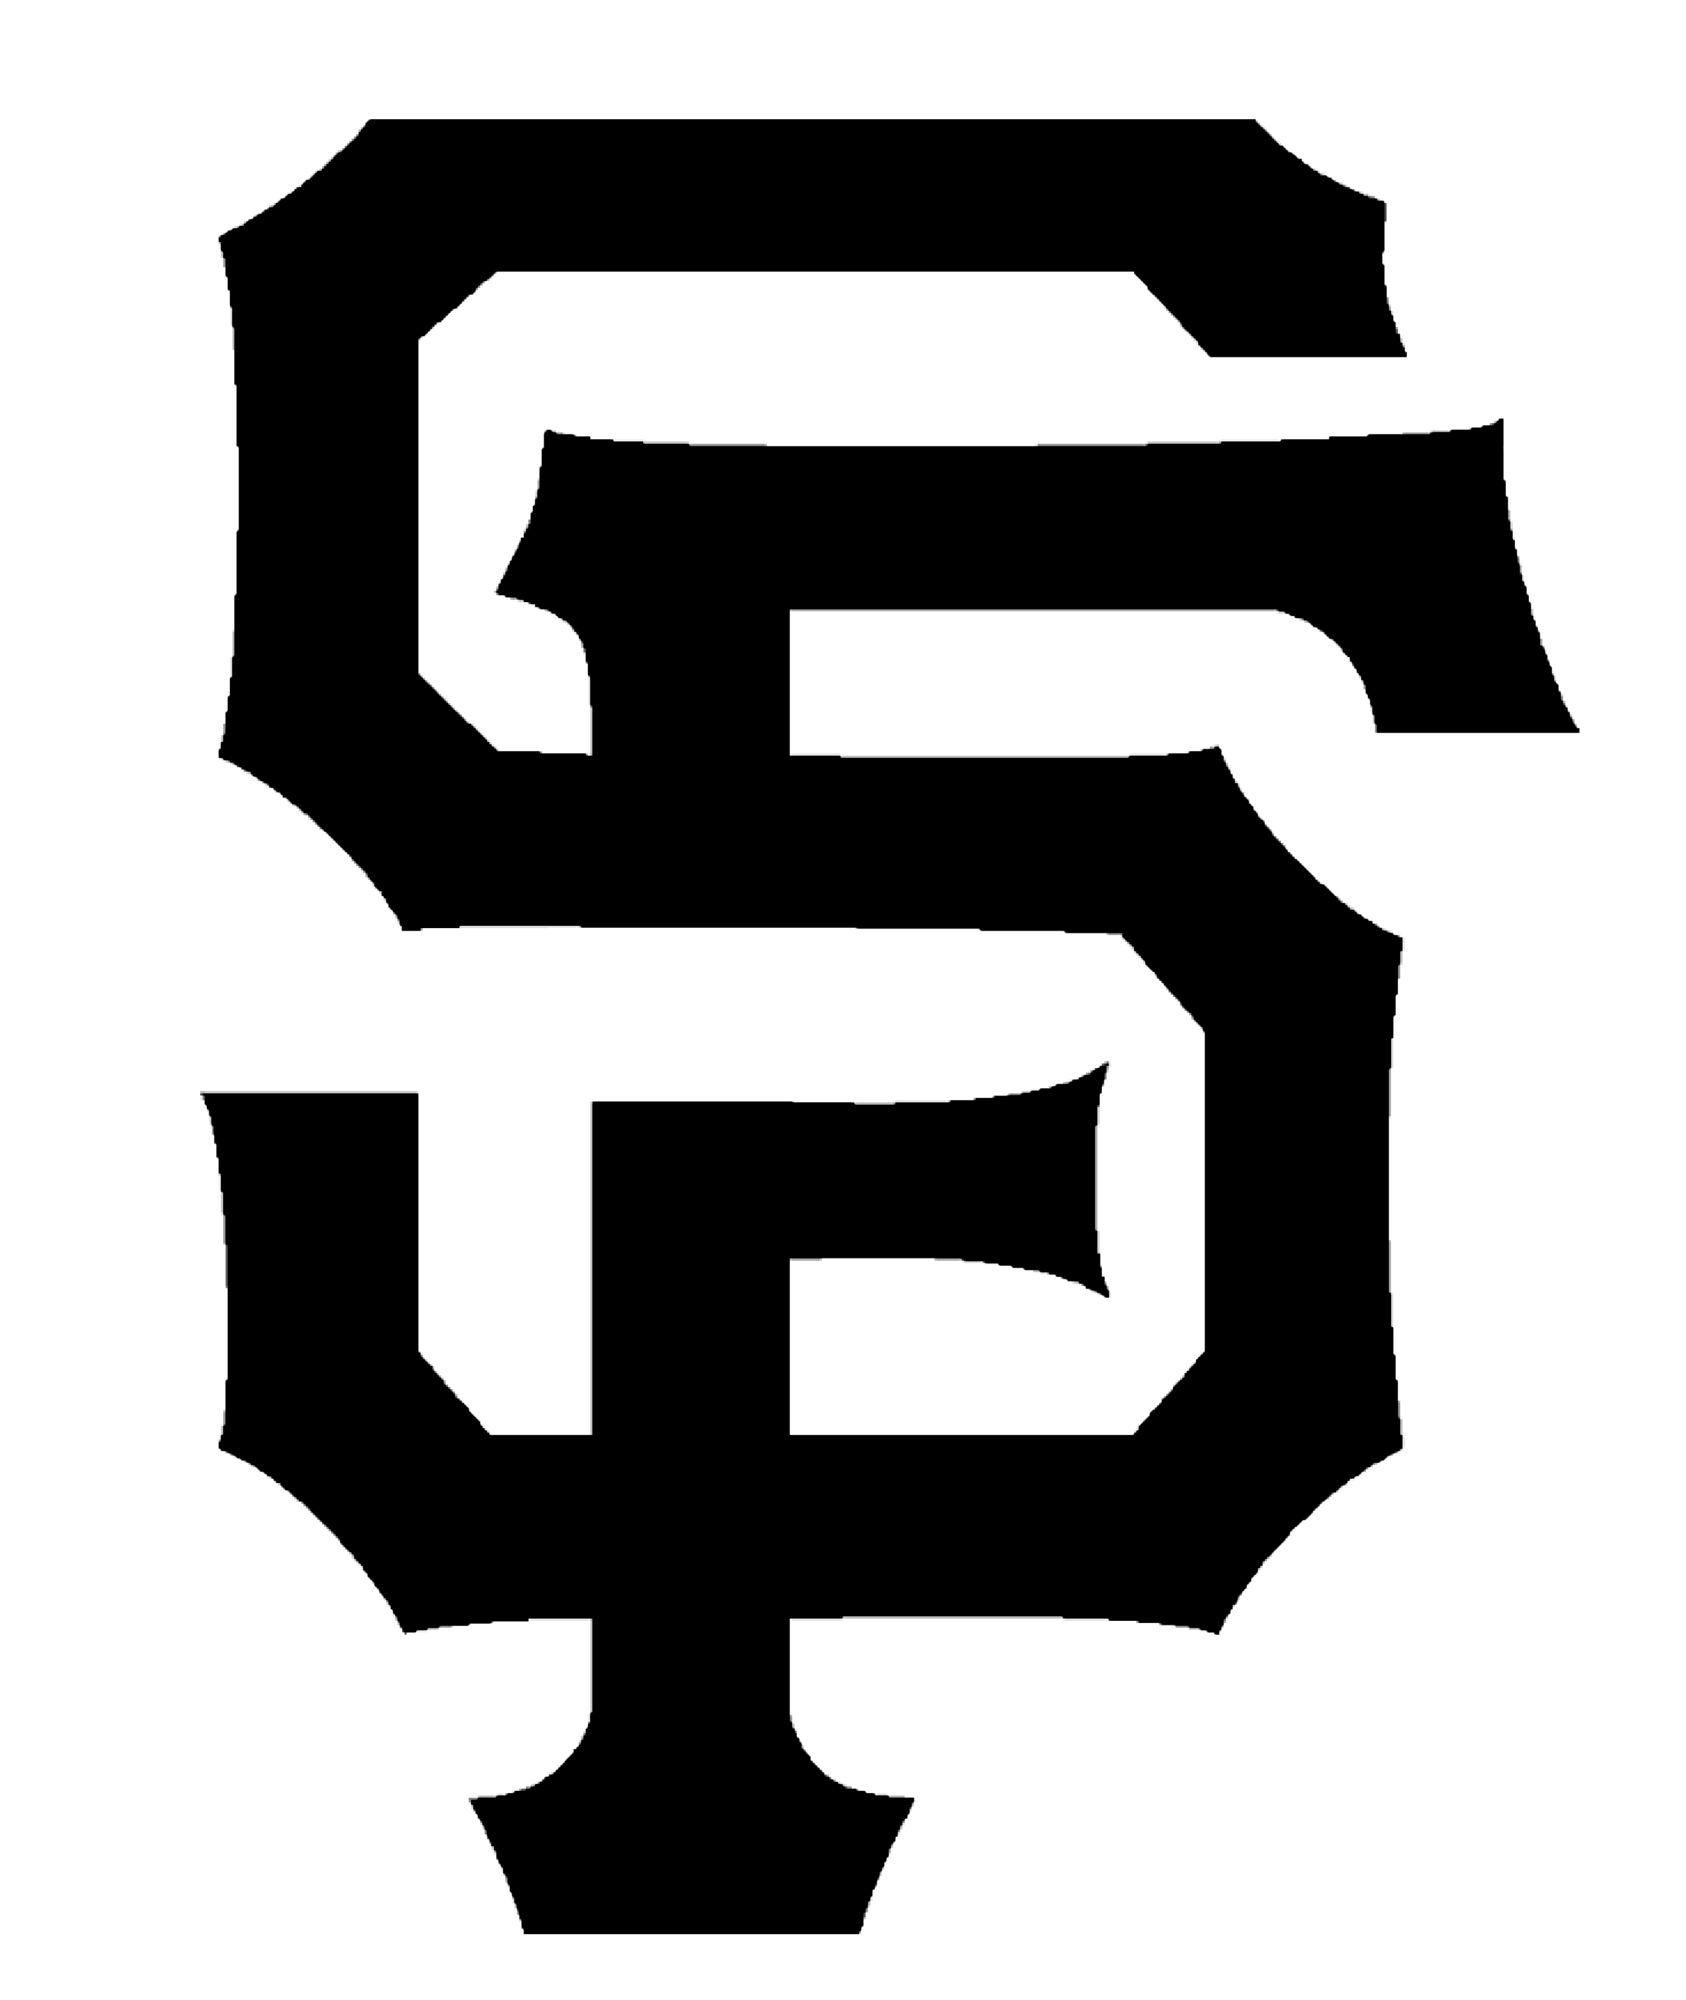 SF Giants Black Logo - Royalty free stock black and white giants logo - RR collections